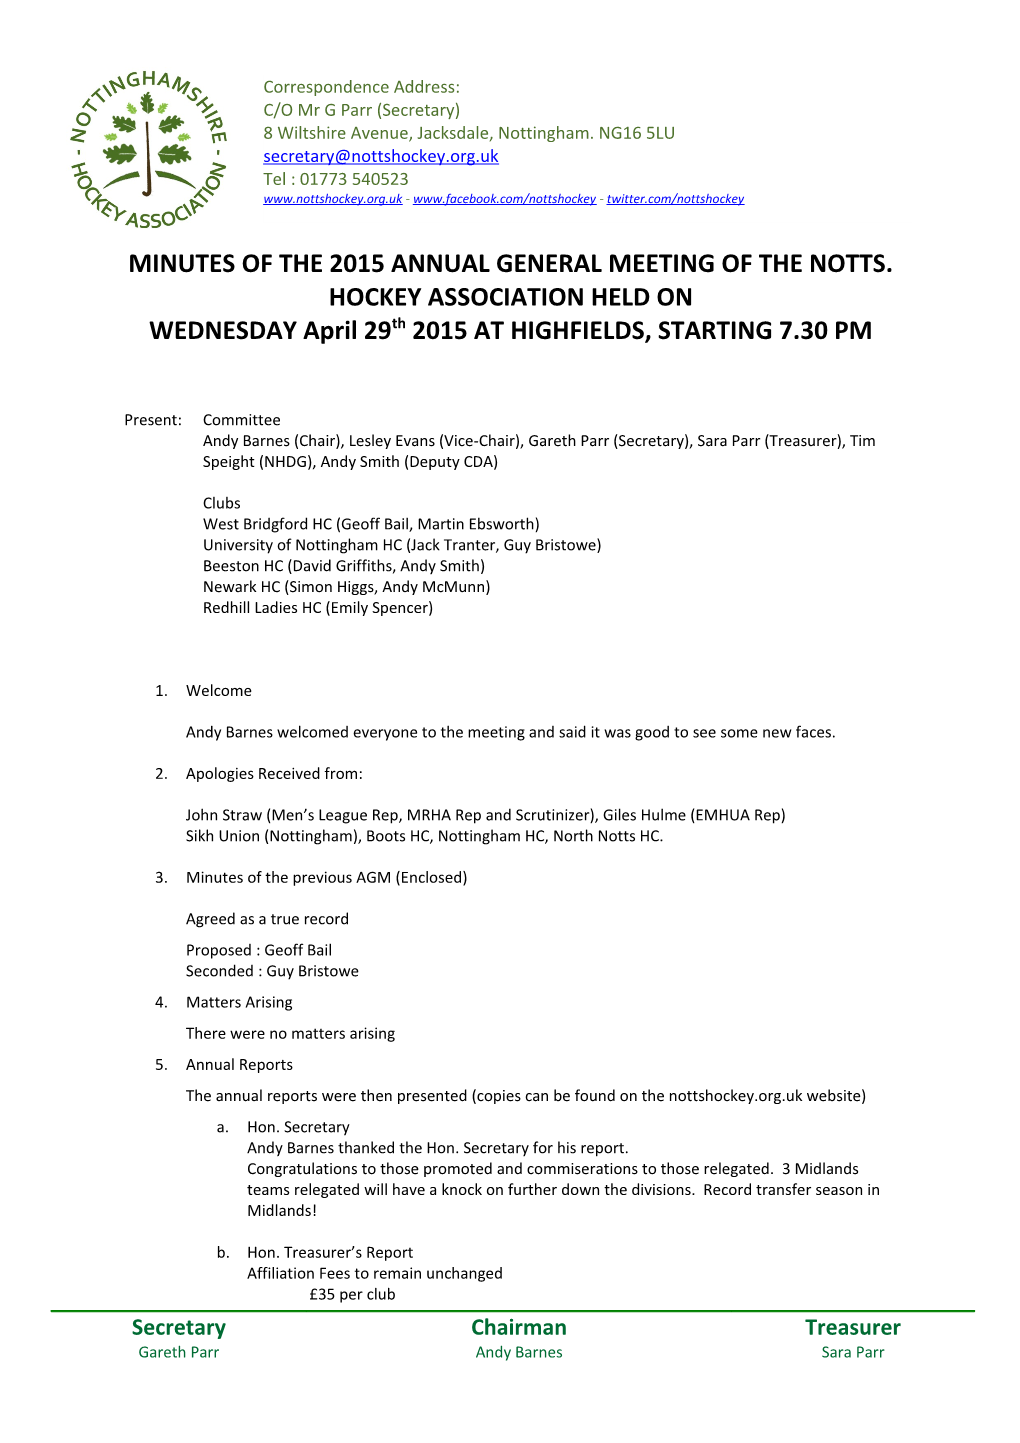 Minutes of the 2015 Annual General Meeting of the Notts. Hockey Association Held on Wednesday